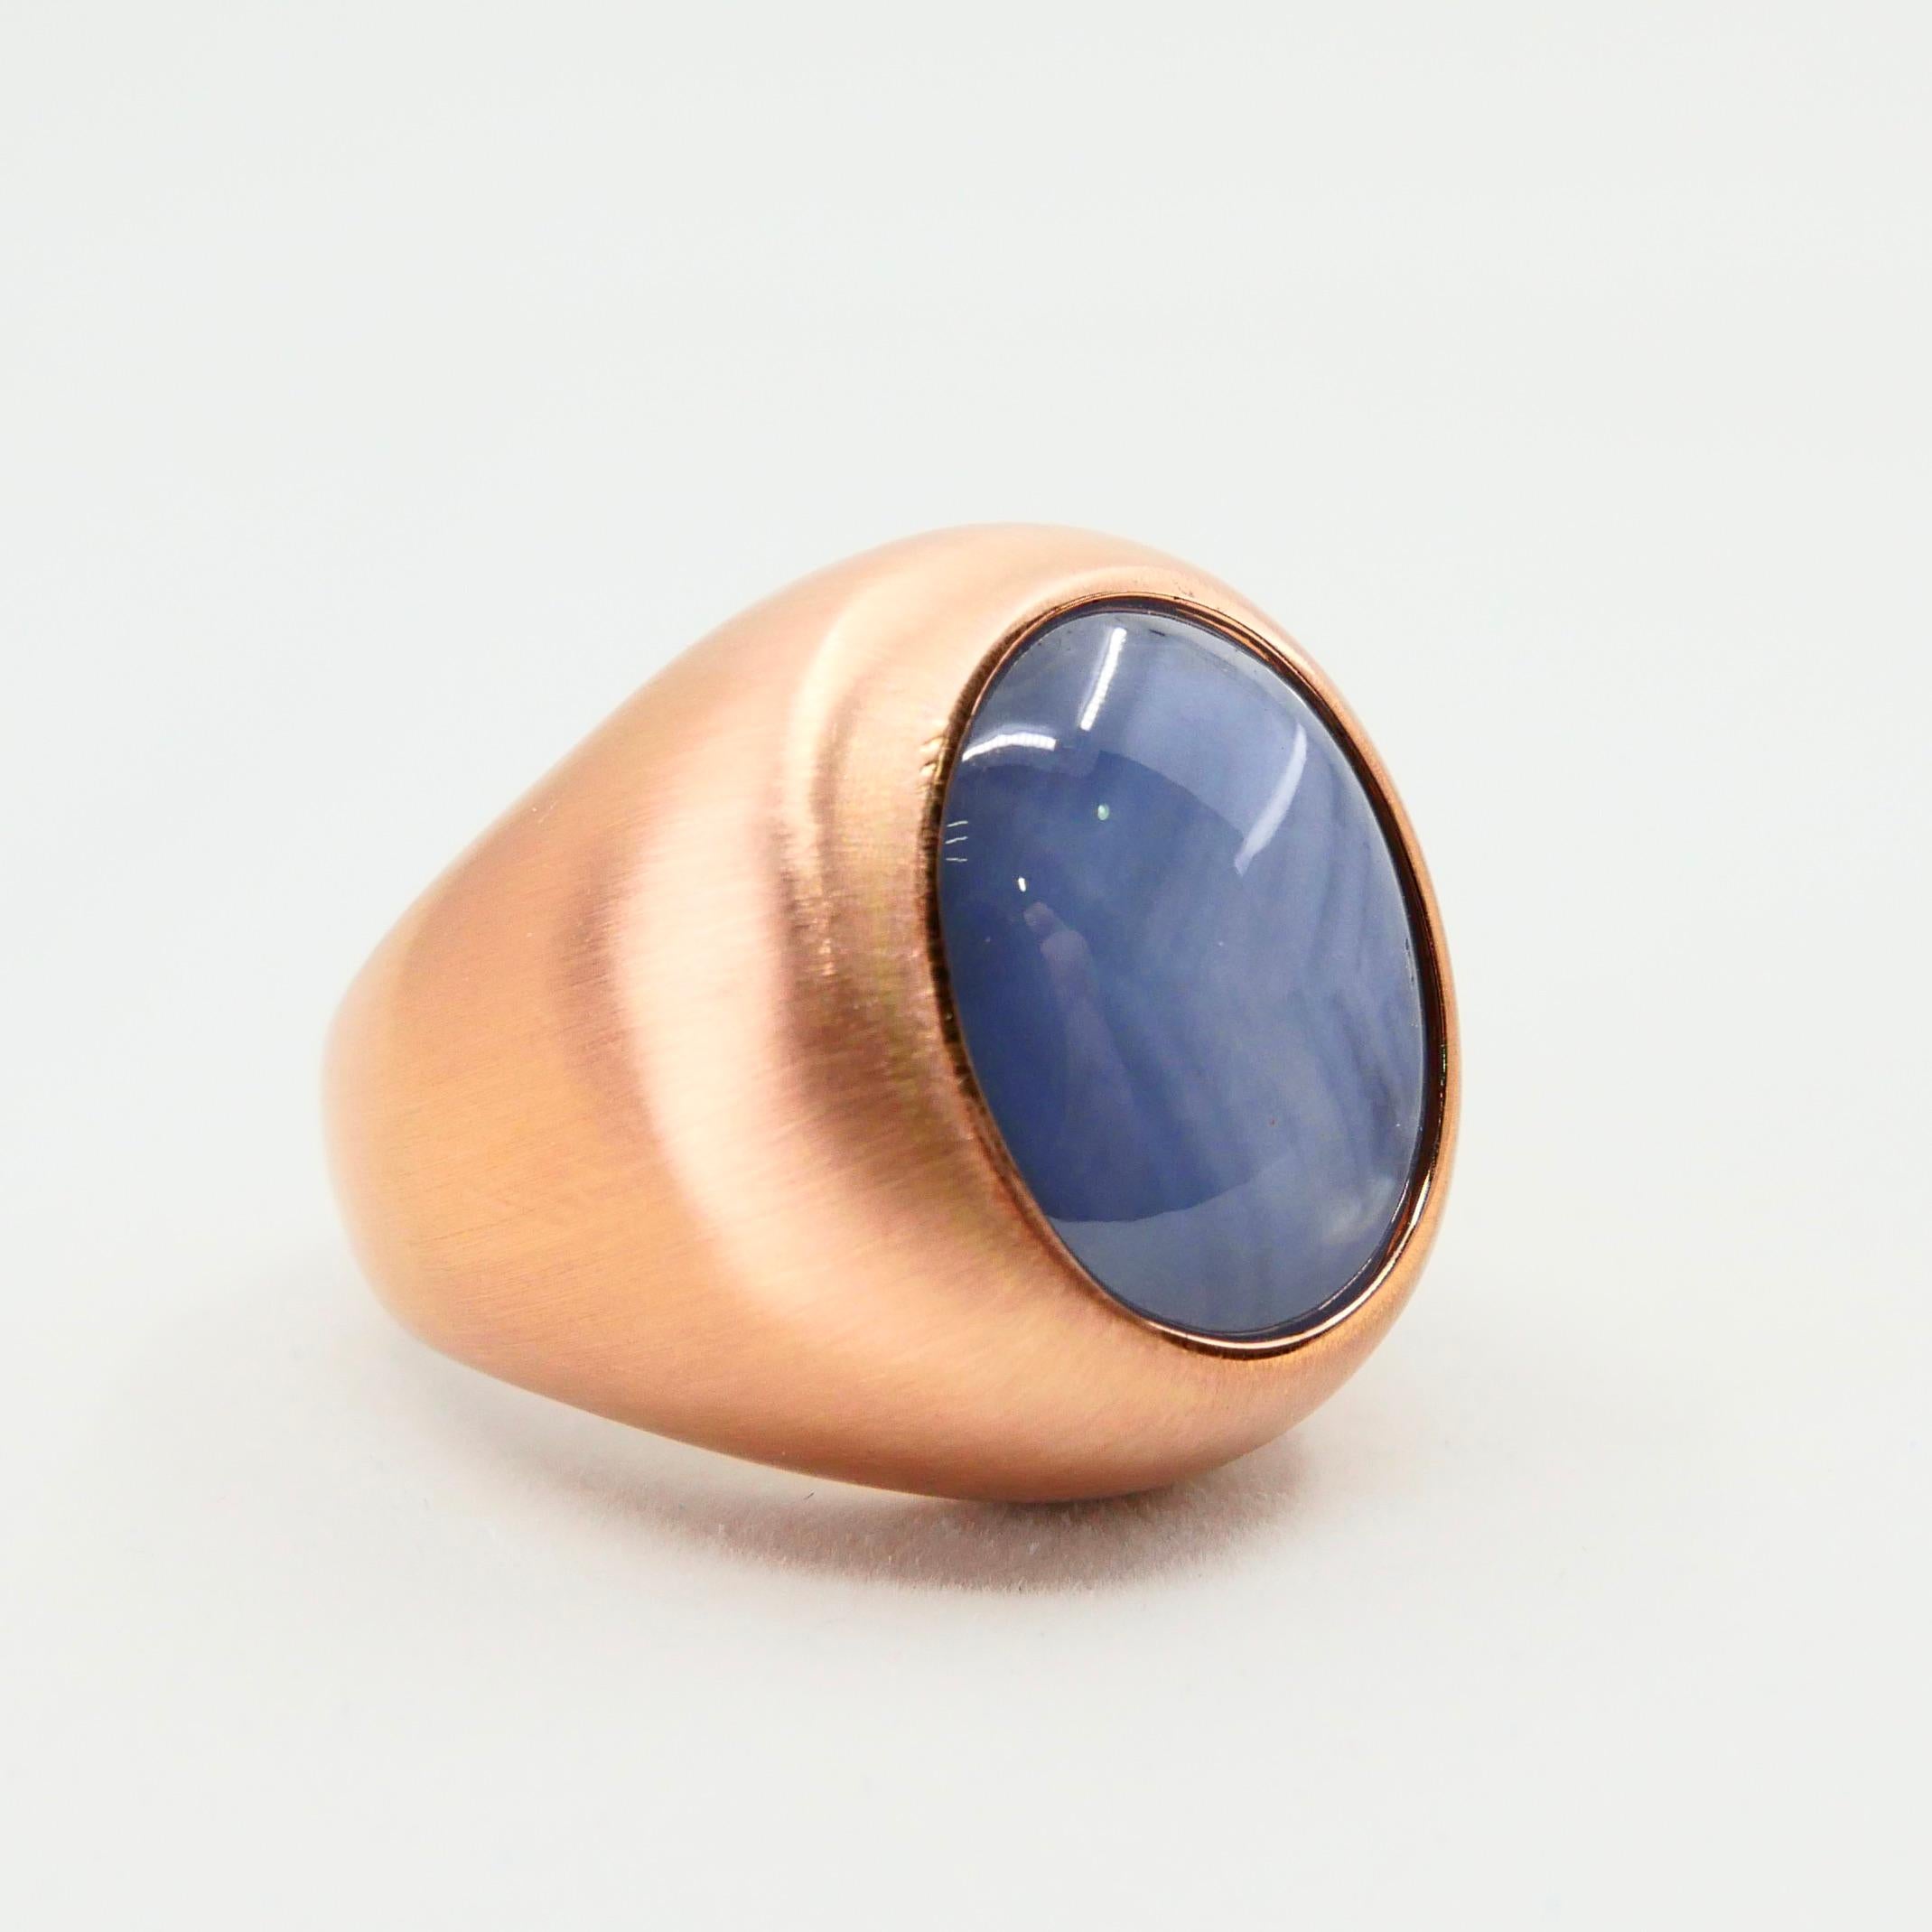 Certified Blue Star Sapphire 39.28 Carat Rose Gold Ring, Unisex, Strong Star 10